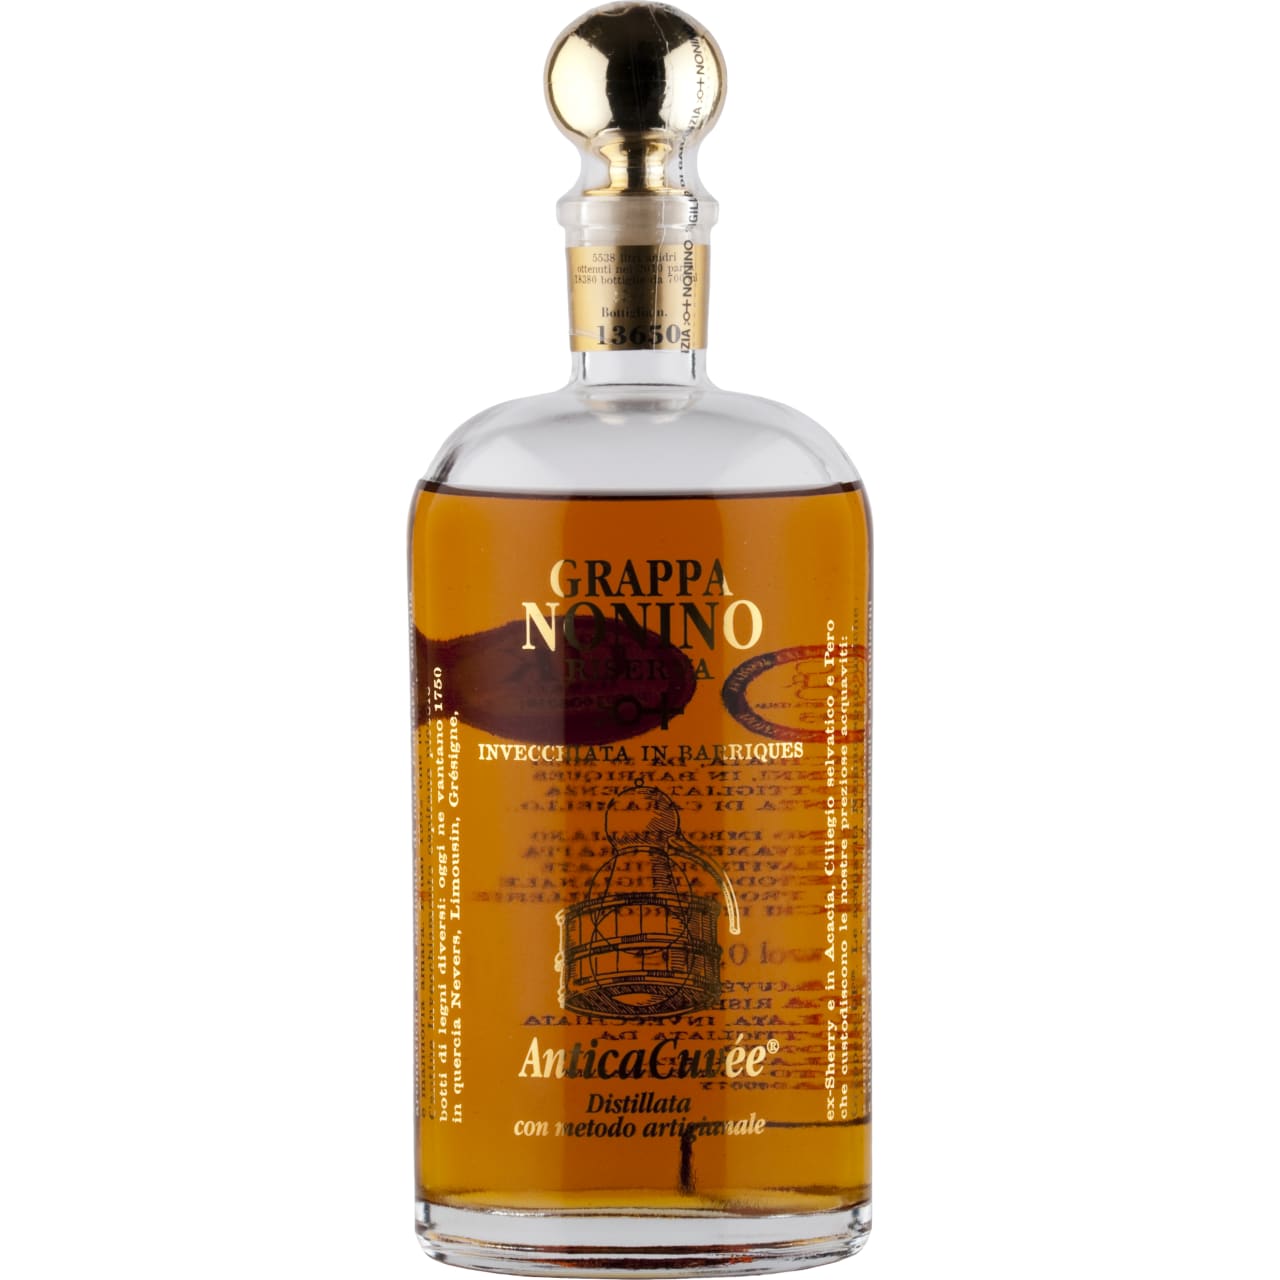 Compared to most fiery grappa, this one, aged 18 months, enters aged brandy territory. It has a bright topaz hue and a big, butterscotch flavor accented by clove and hot cinnamon sparks, with a drying feel.